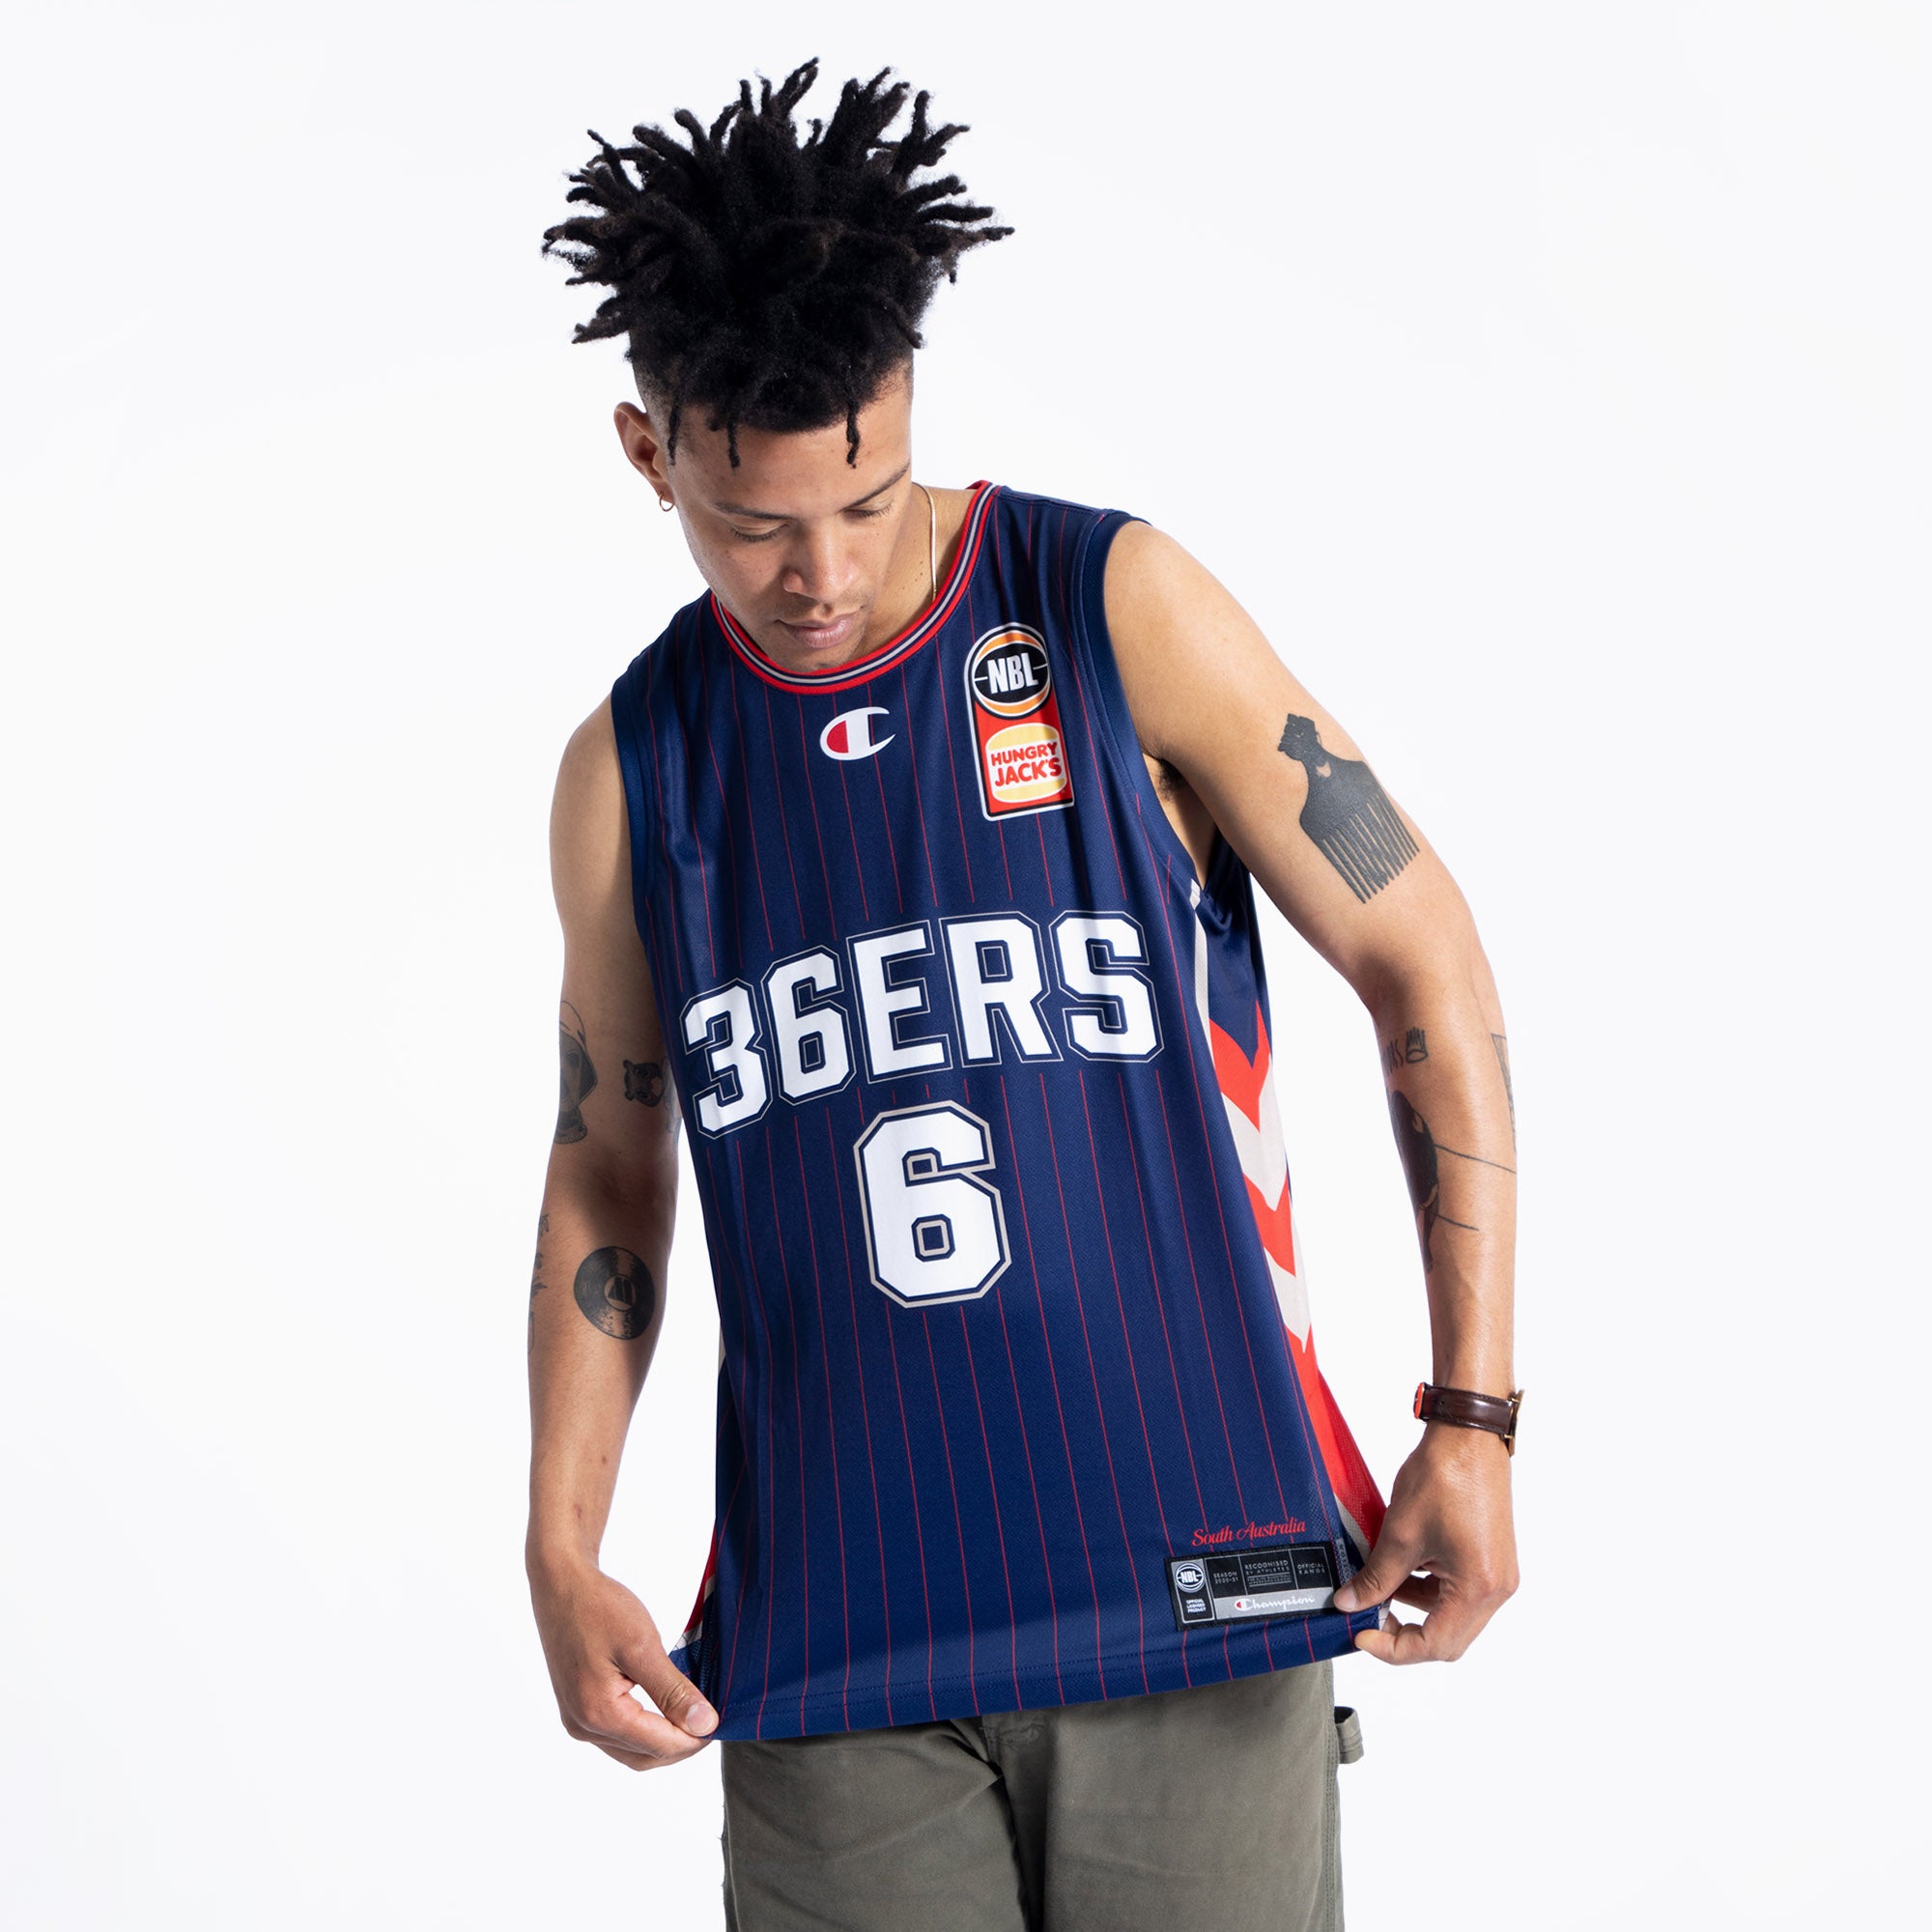 New jerseys for NBL “City” round : r/nbl